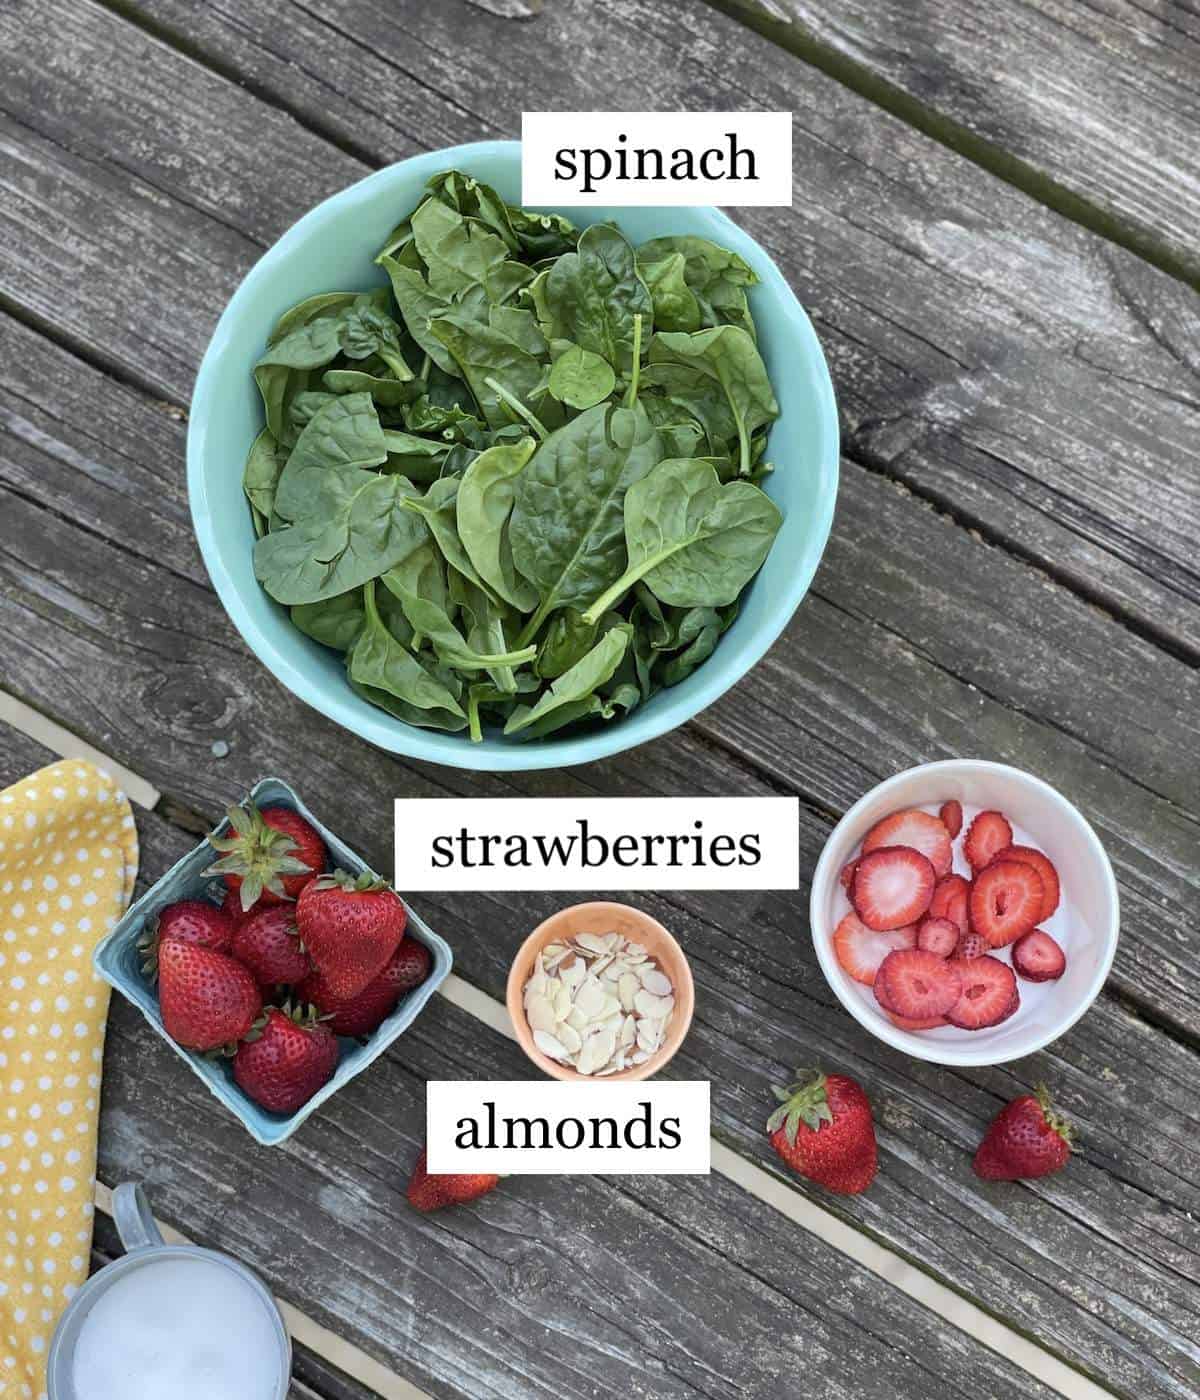 The ingredients in strawberry spinach salad, laid out and labeled.